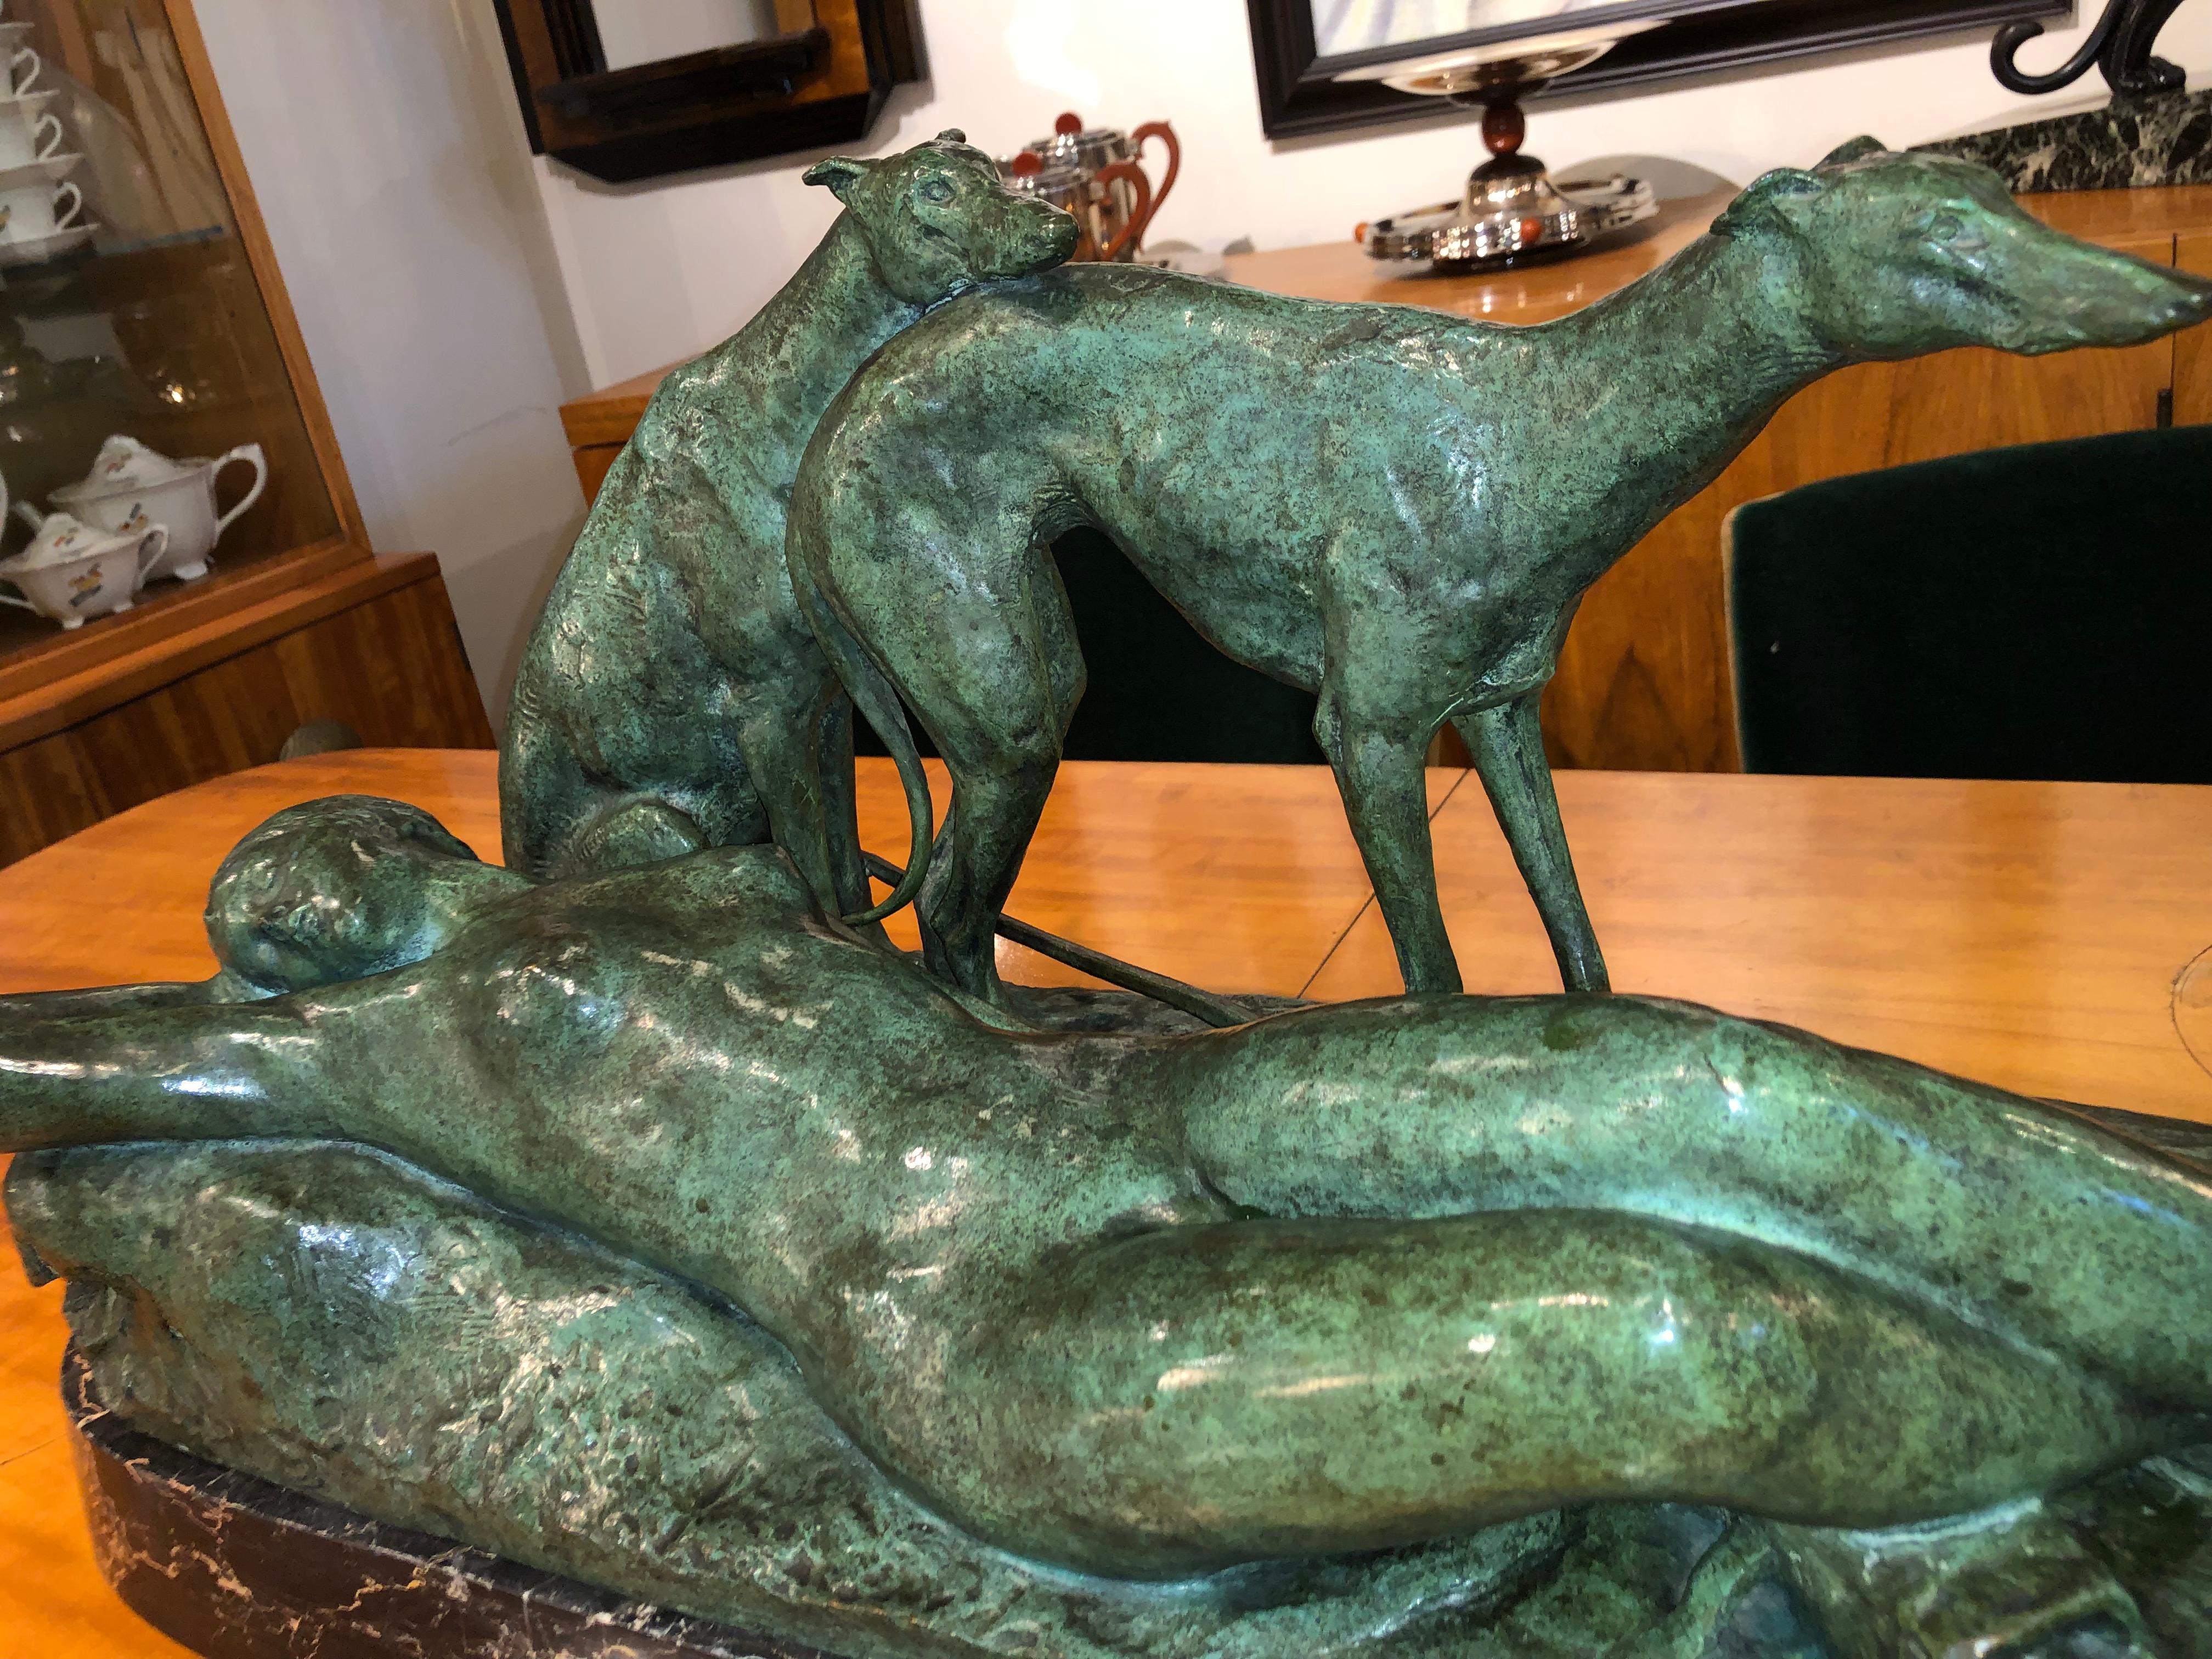 Ary Bitter was an important French Artist who specialized in animal sculptures and the female form. He created many significant works during the Art Deco period. This unique piece, extremely rare, is stunning, artistic and rendered in the highest